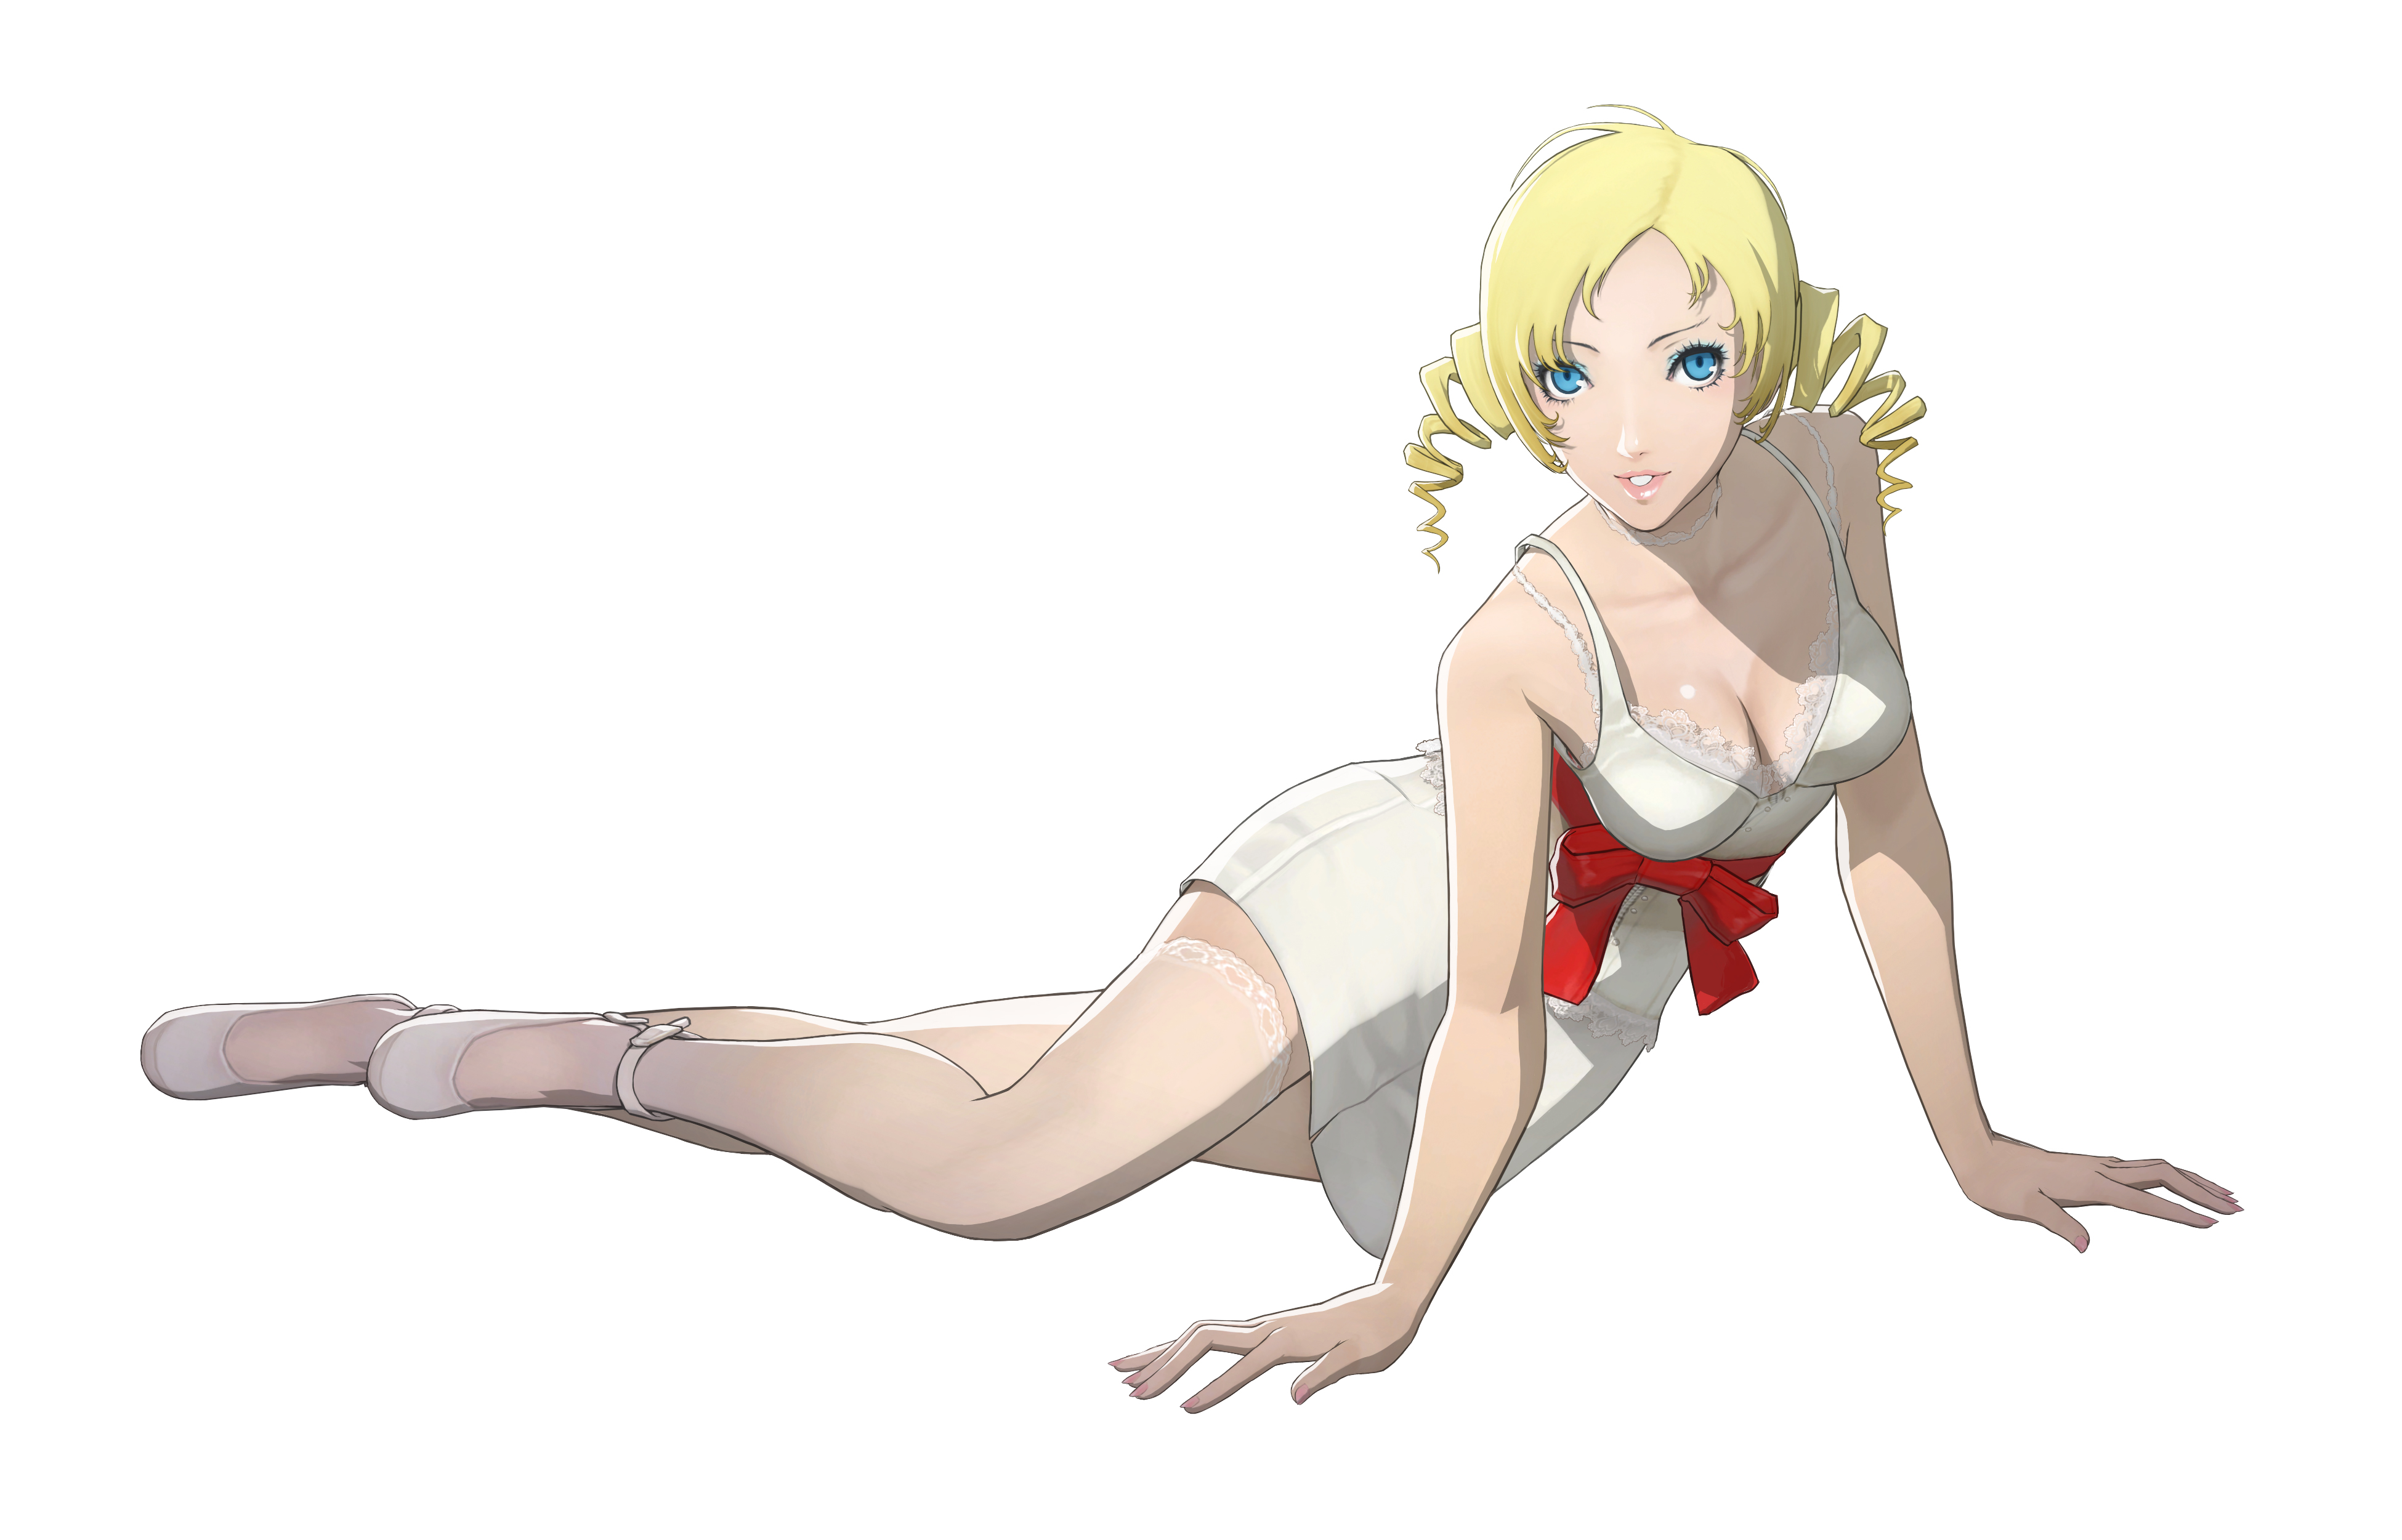 sprite - sprite contest:hot sexxi babes in most gaming and movies Catherine_characterart_catherine